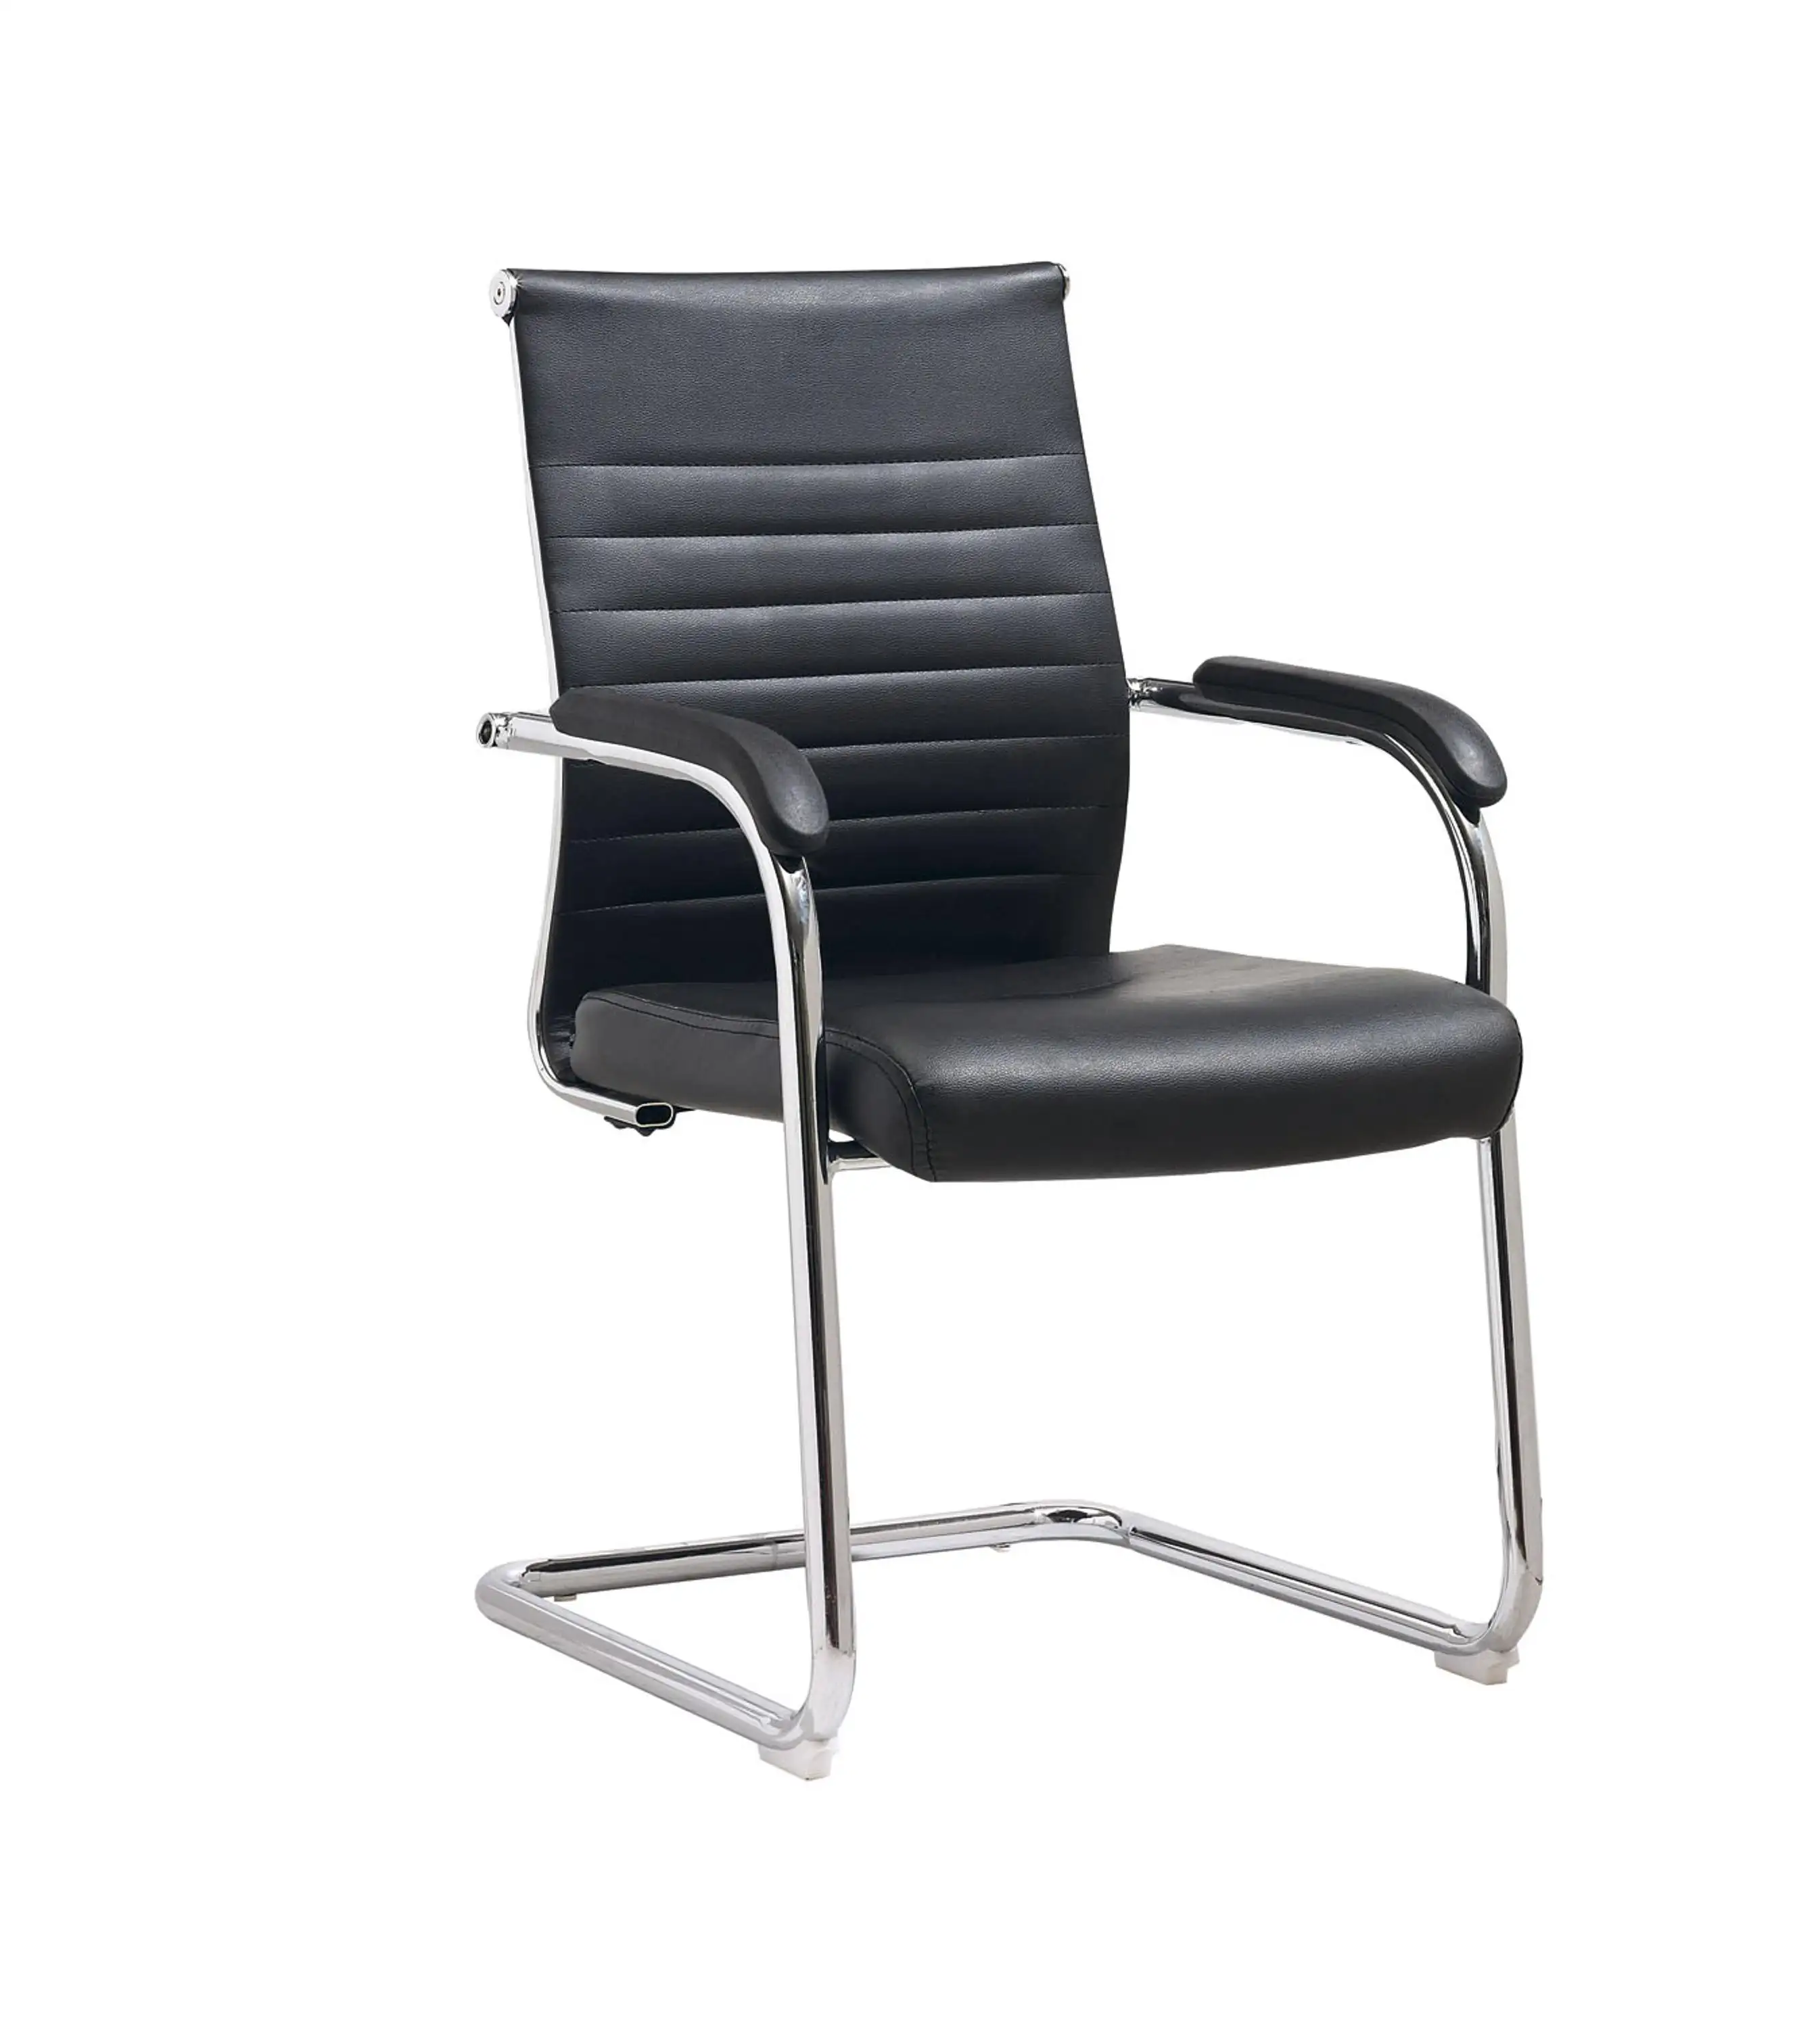 W640-2PU Fixed frame executive visitor chair mid-back leather office chair